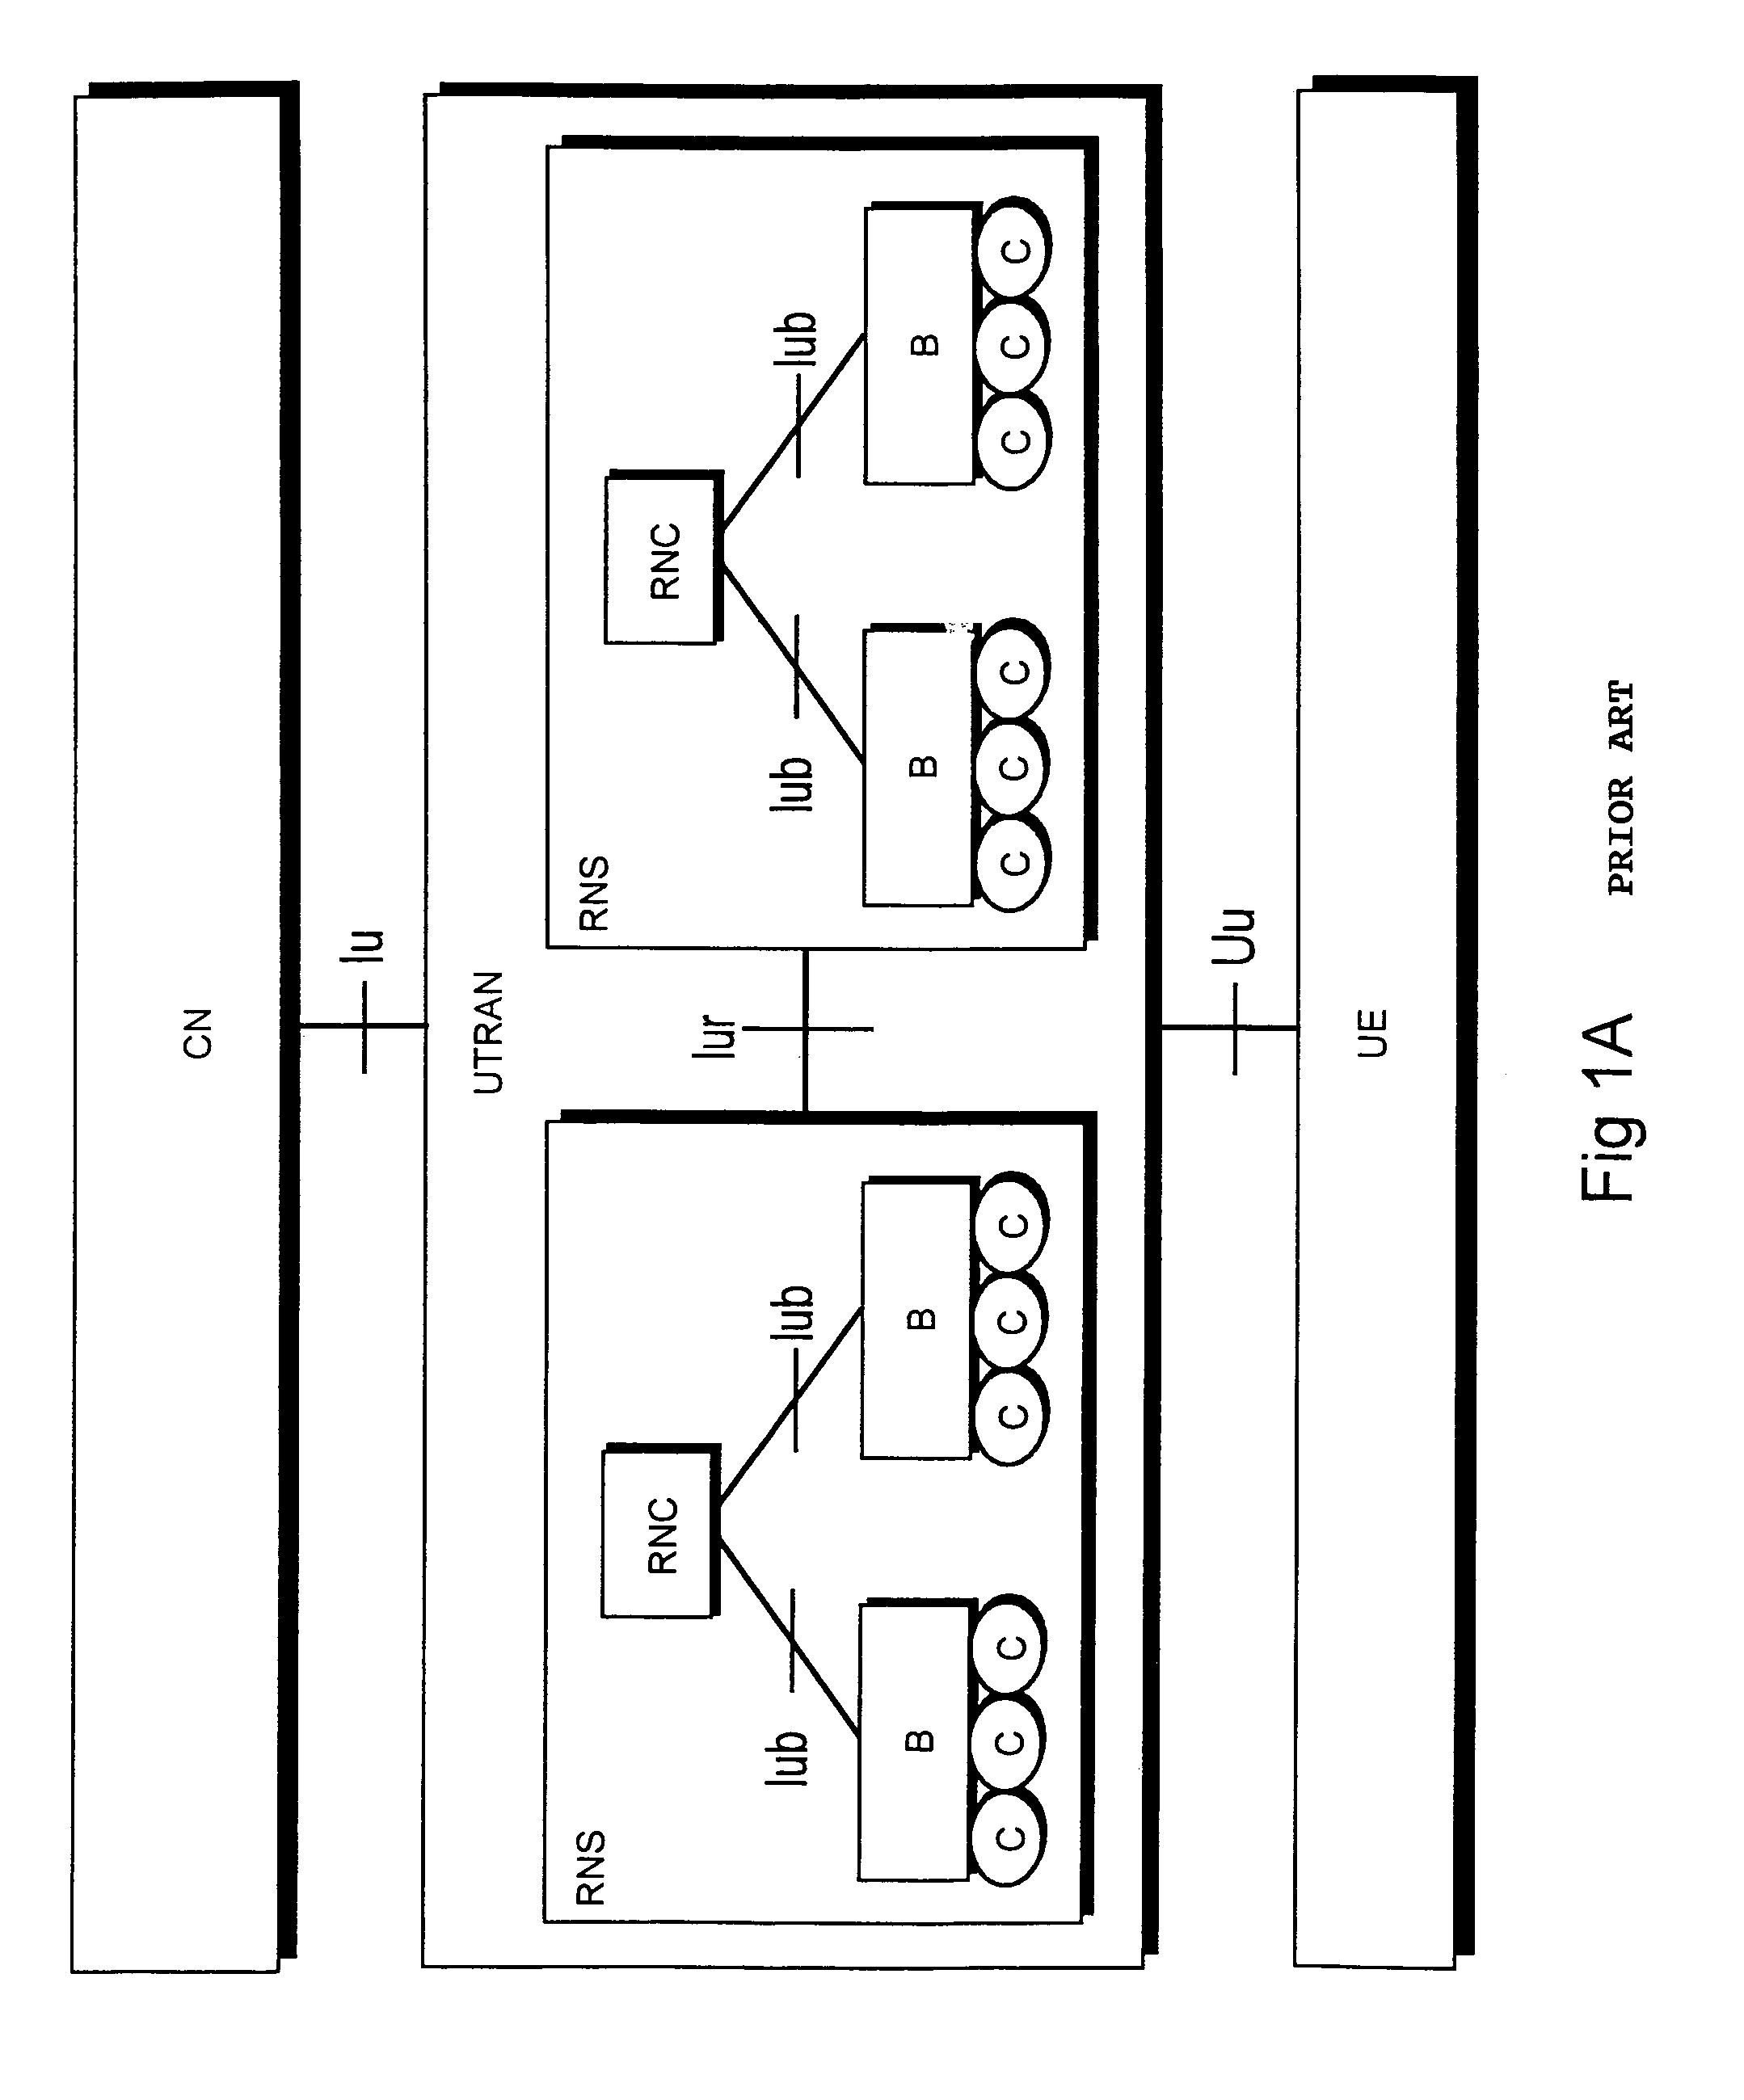 Data transmission in packet-switched radio system implementing user equipment location service